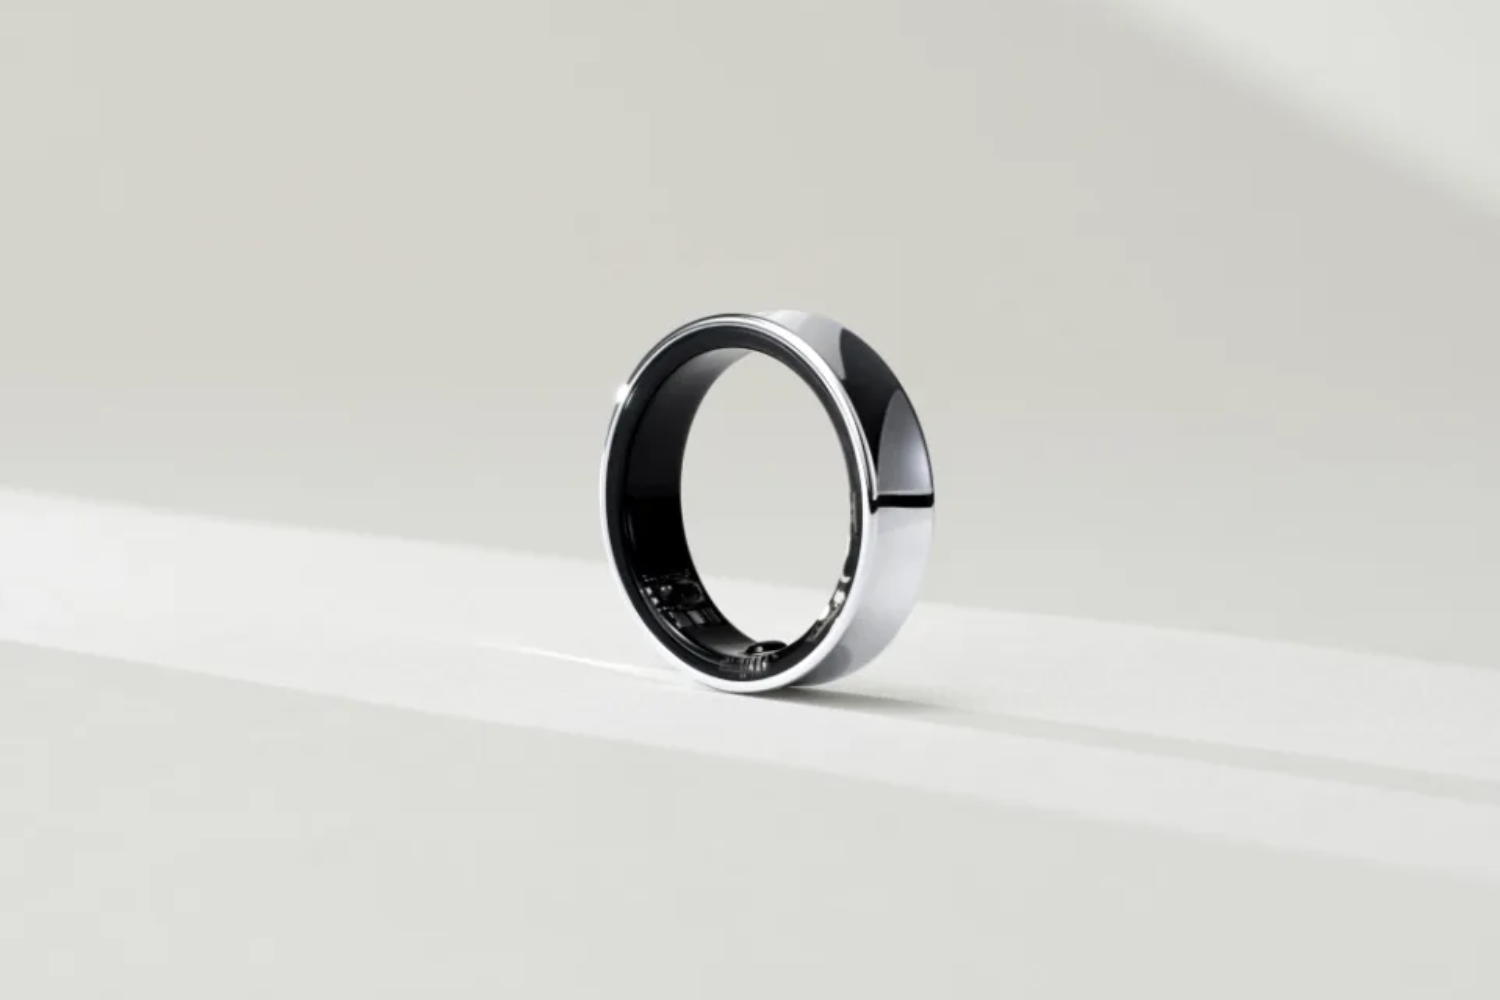 The Samsung Galaxy Ring should copy (or fix) these features from Oura